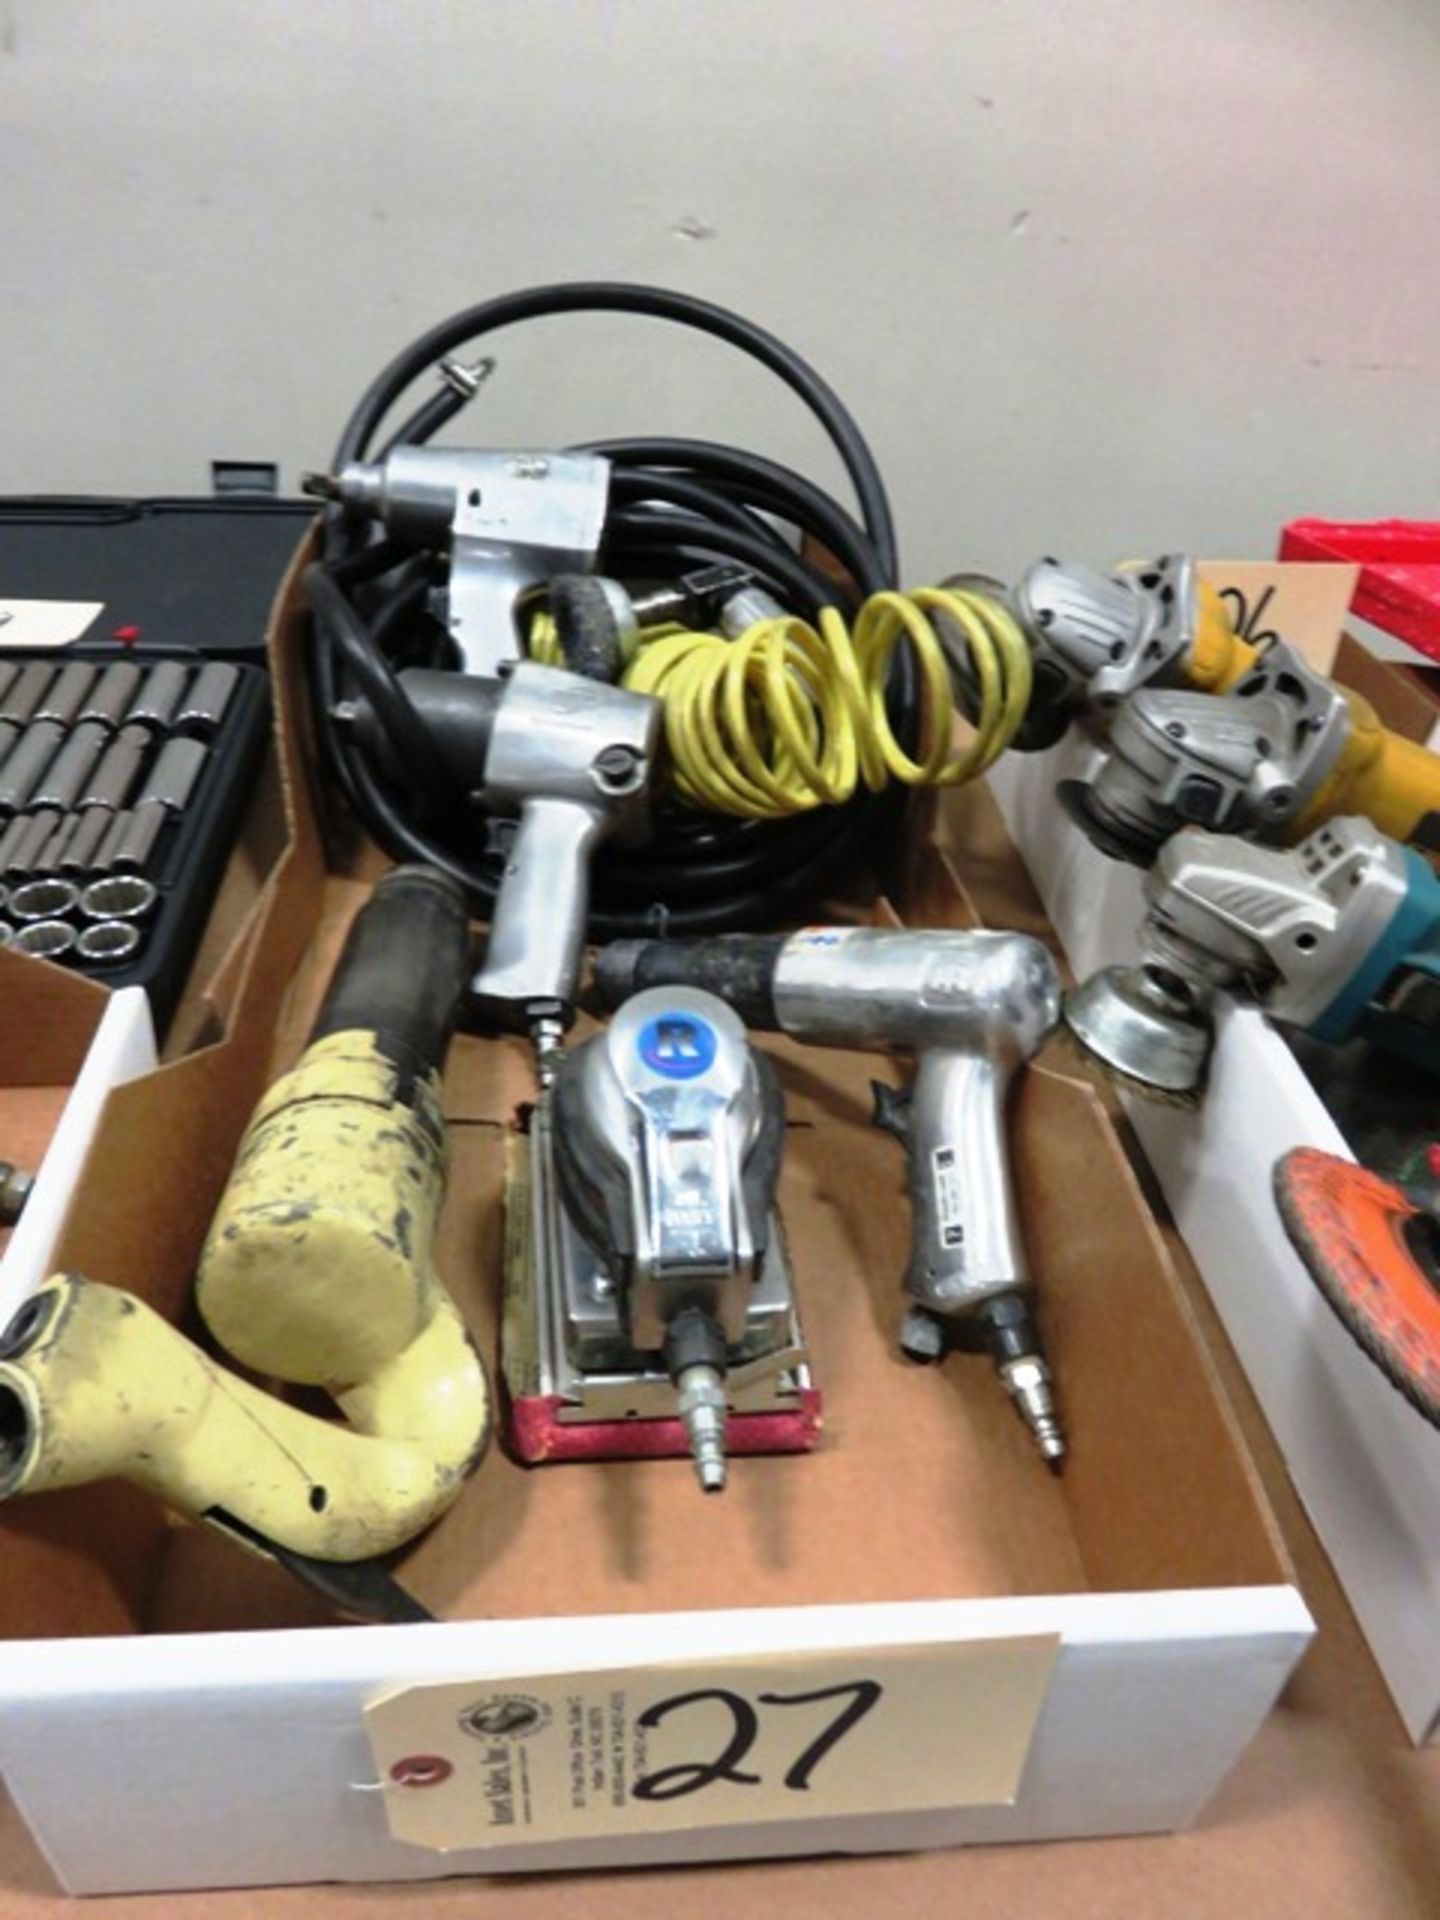 Pneumatic Hand Tools, Impact Wrenches, Grinder Sander